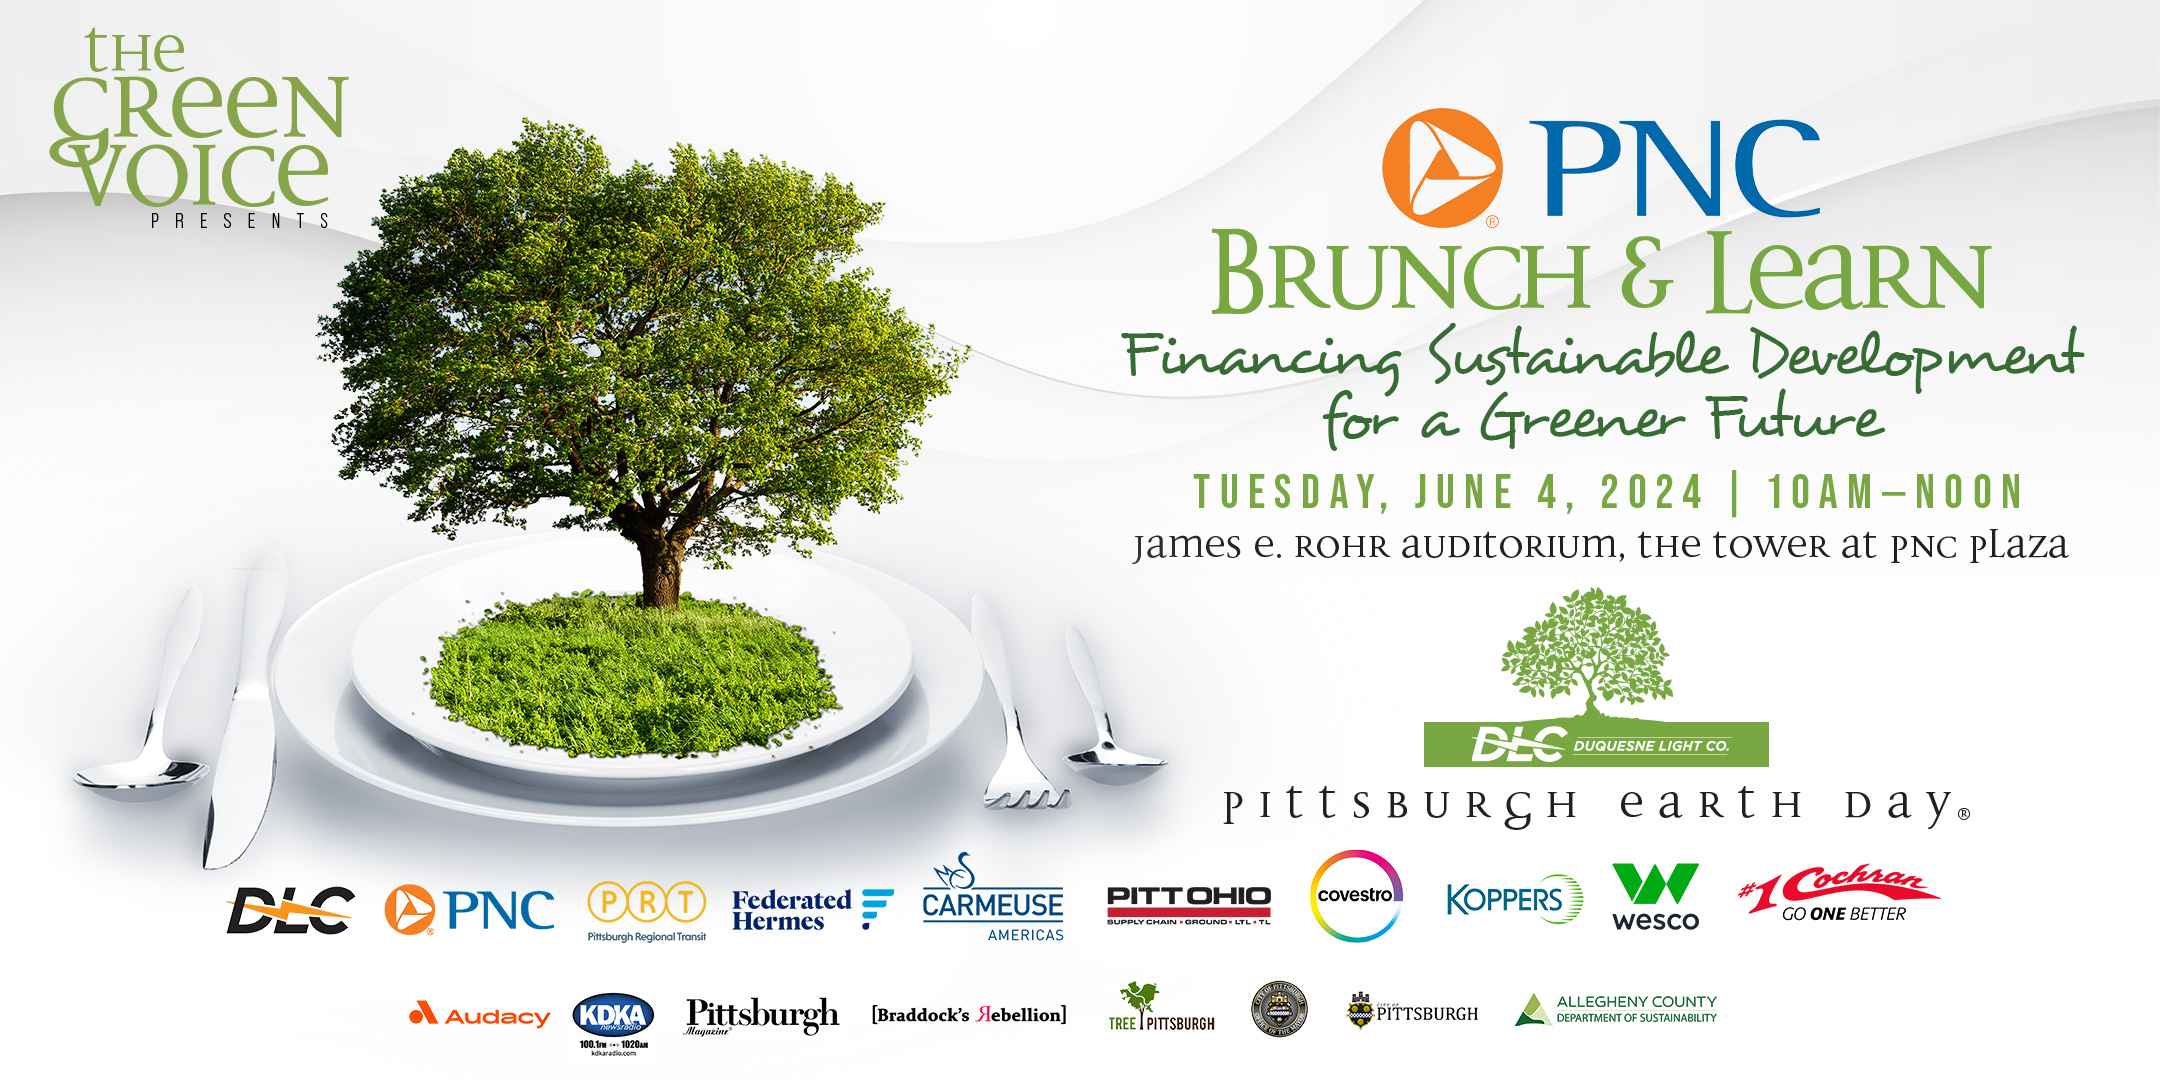 PNC Brunch and Learn Pittsburgh Earth Day